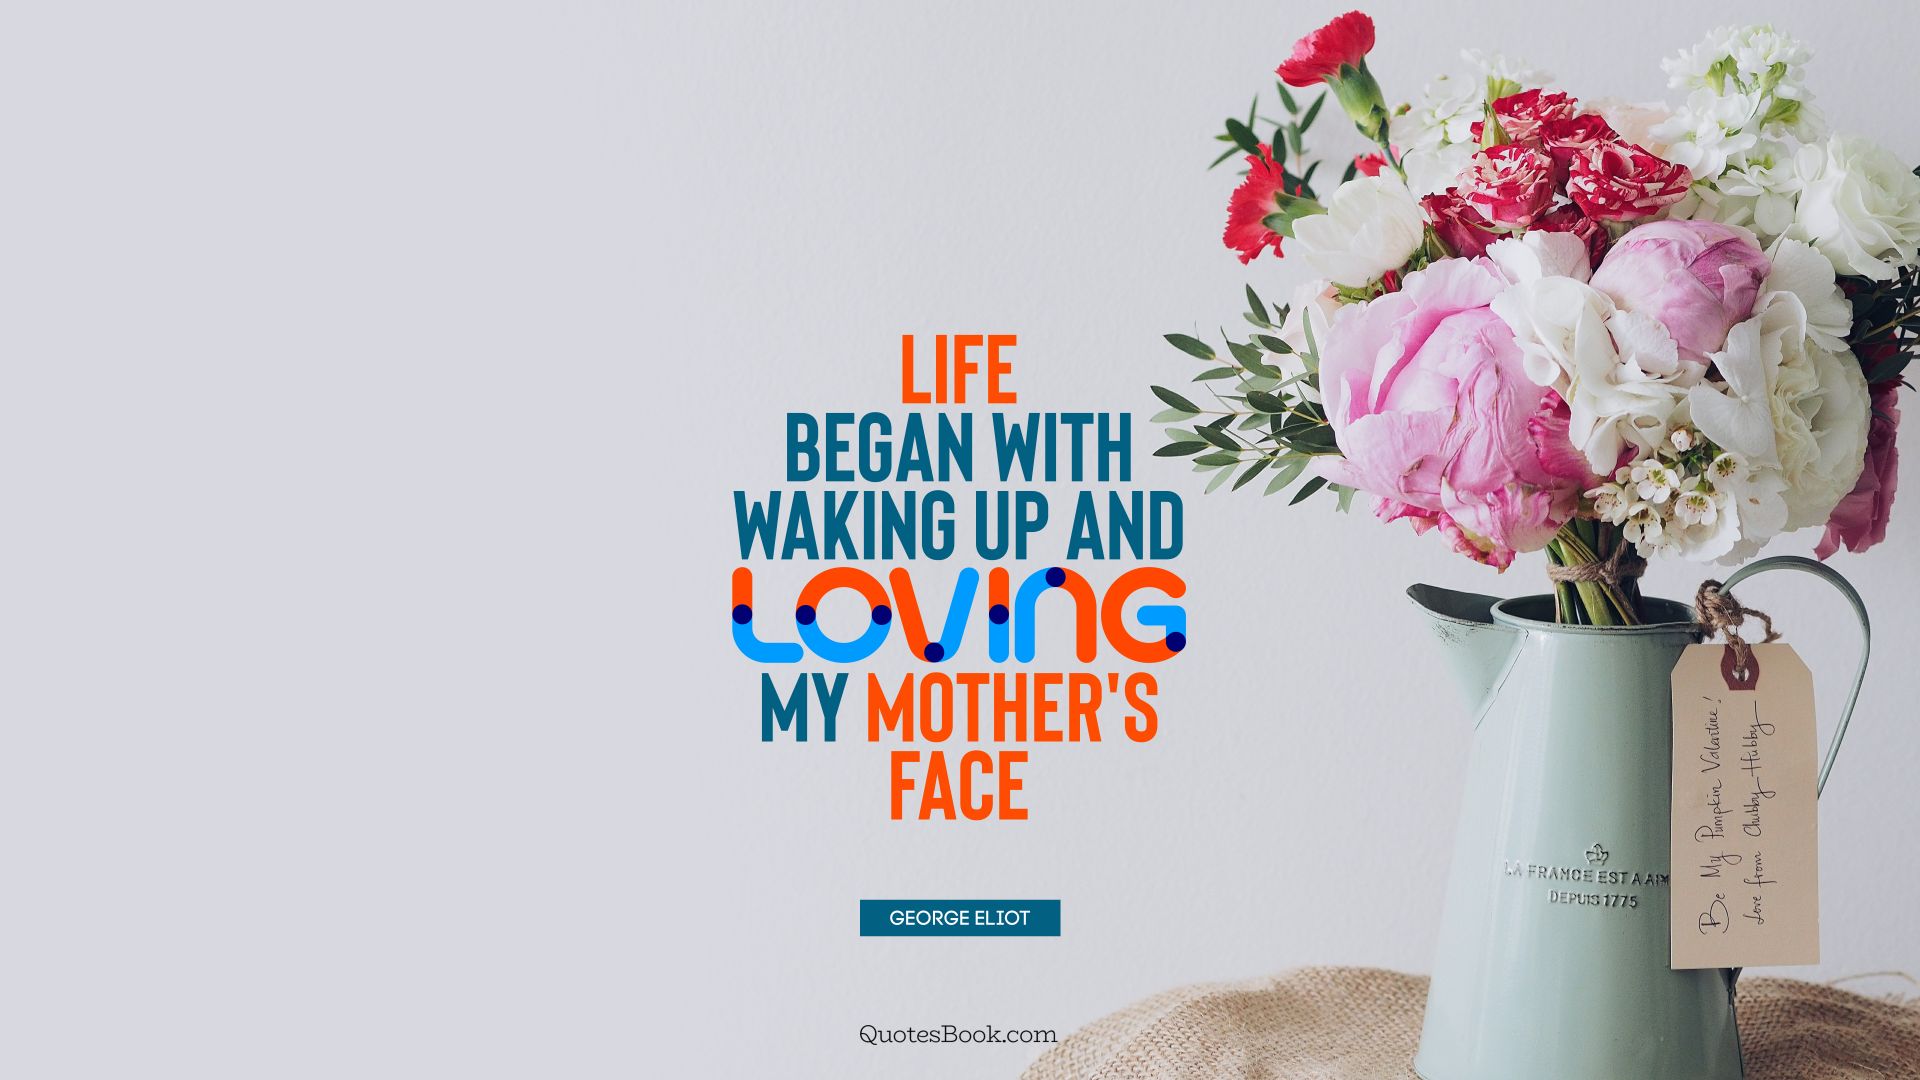 Life began with waking up and loving my mother's face. - Quote by George Eliot